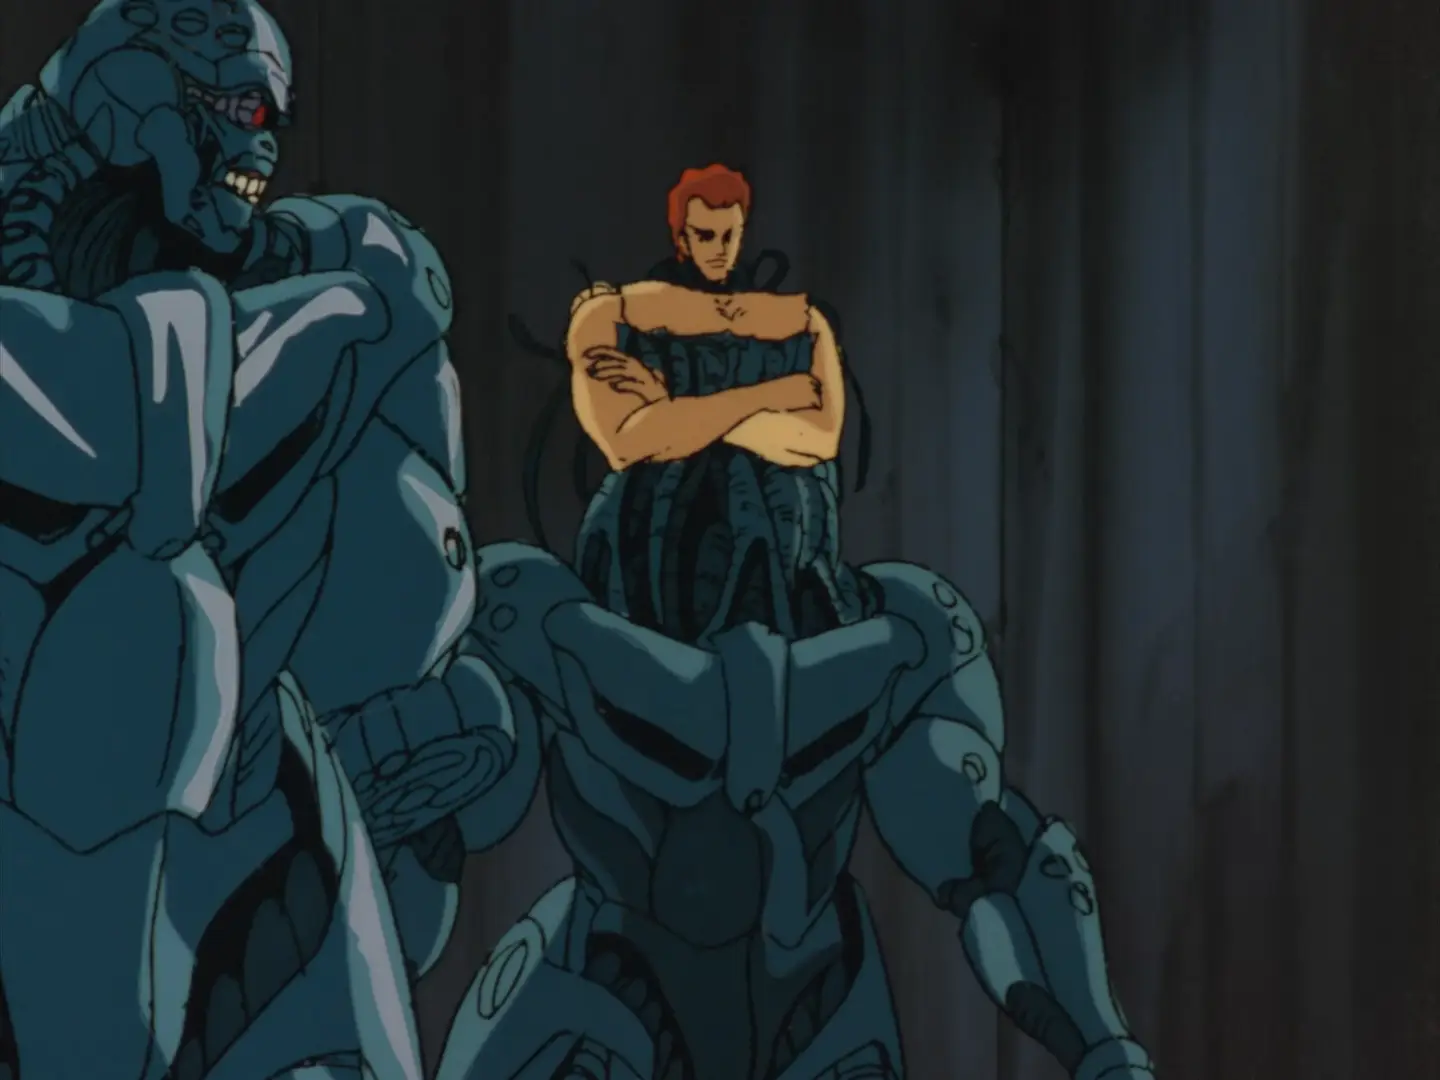 Still from Bubblegum Crisis (1987) showing two Boomers. One is just a metallic robot with a metal skull, but the other has a human shoulders connected to the bulky metal frame by a mass of tentacles.